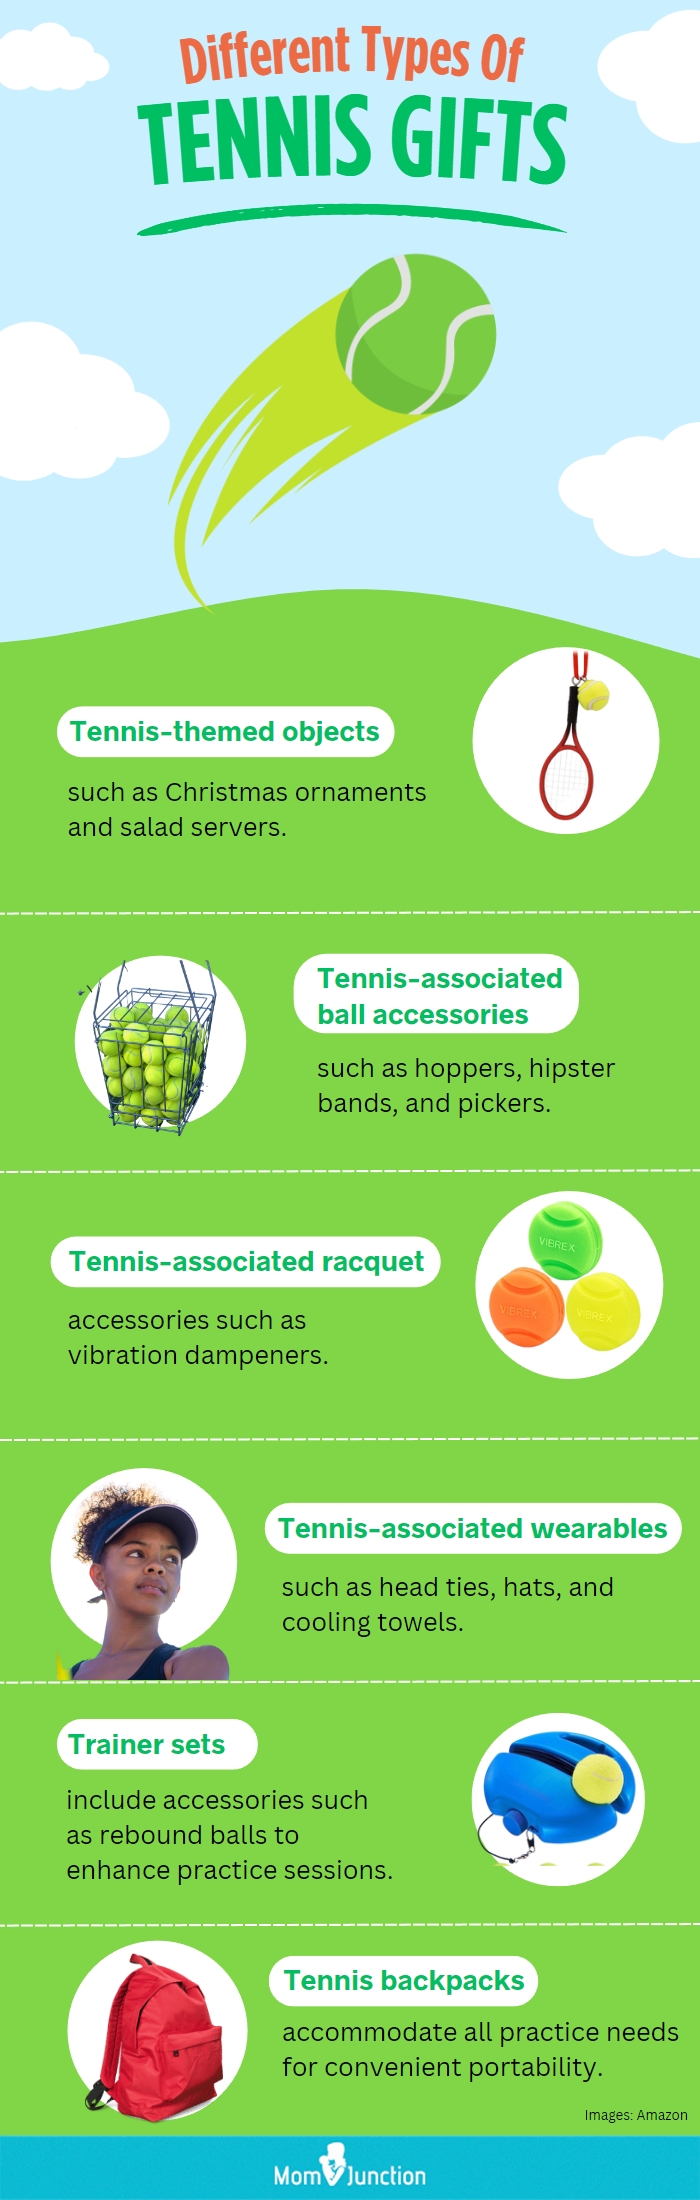 Different Types Of Tennis Gifts (infographic)